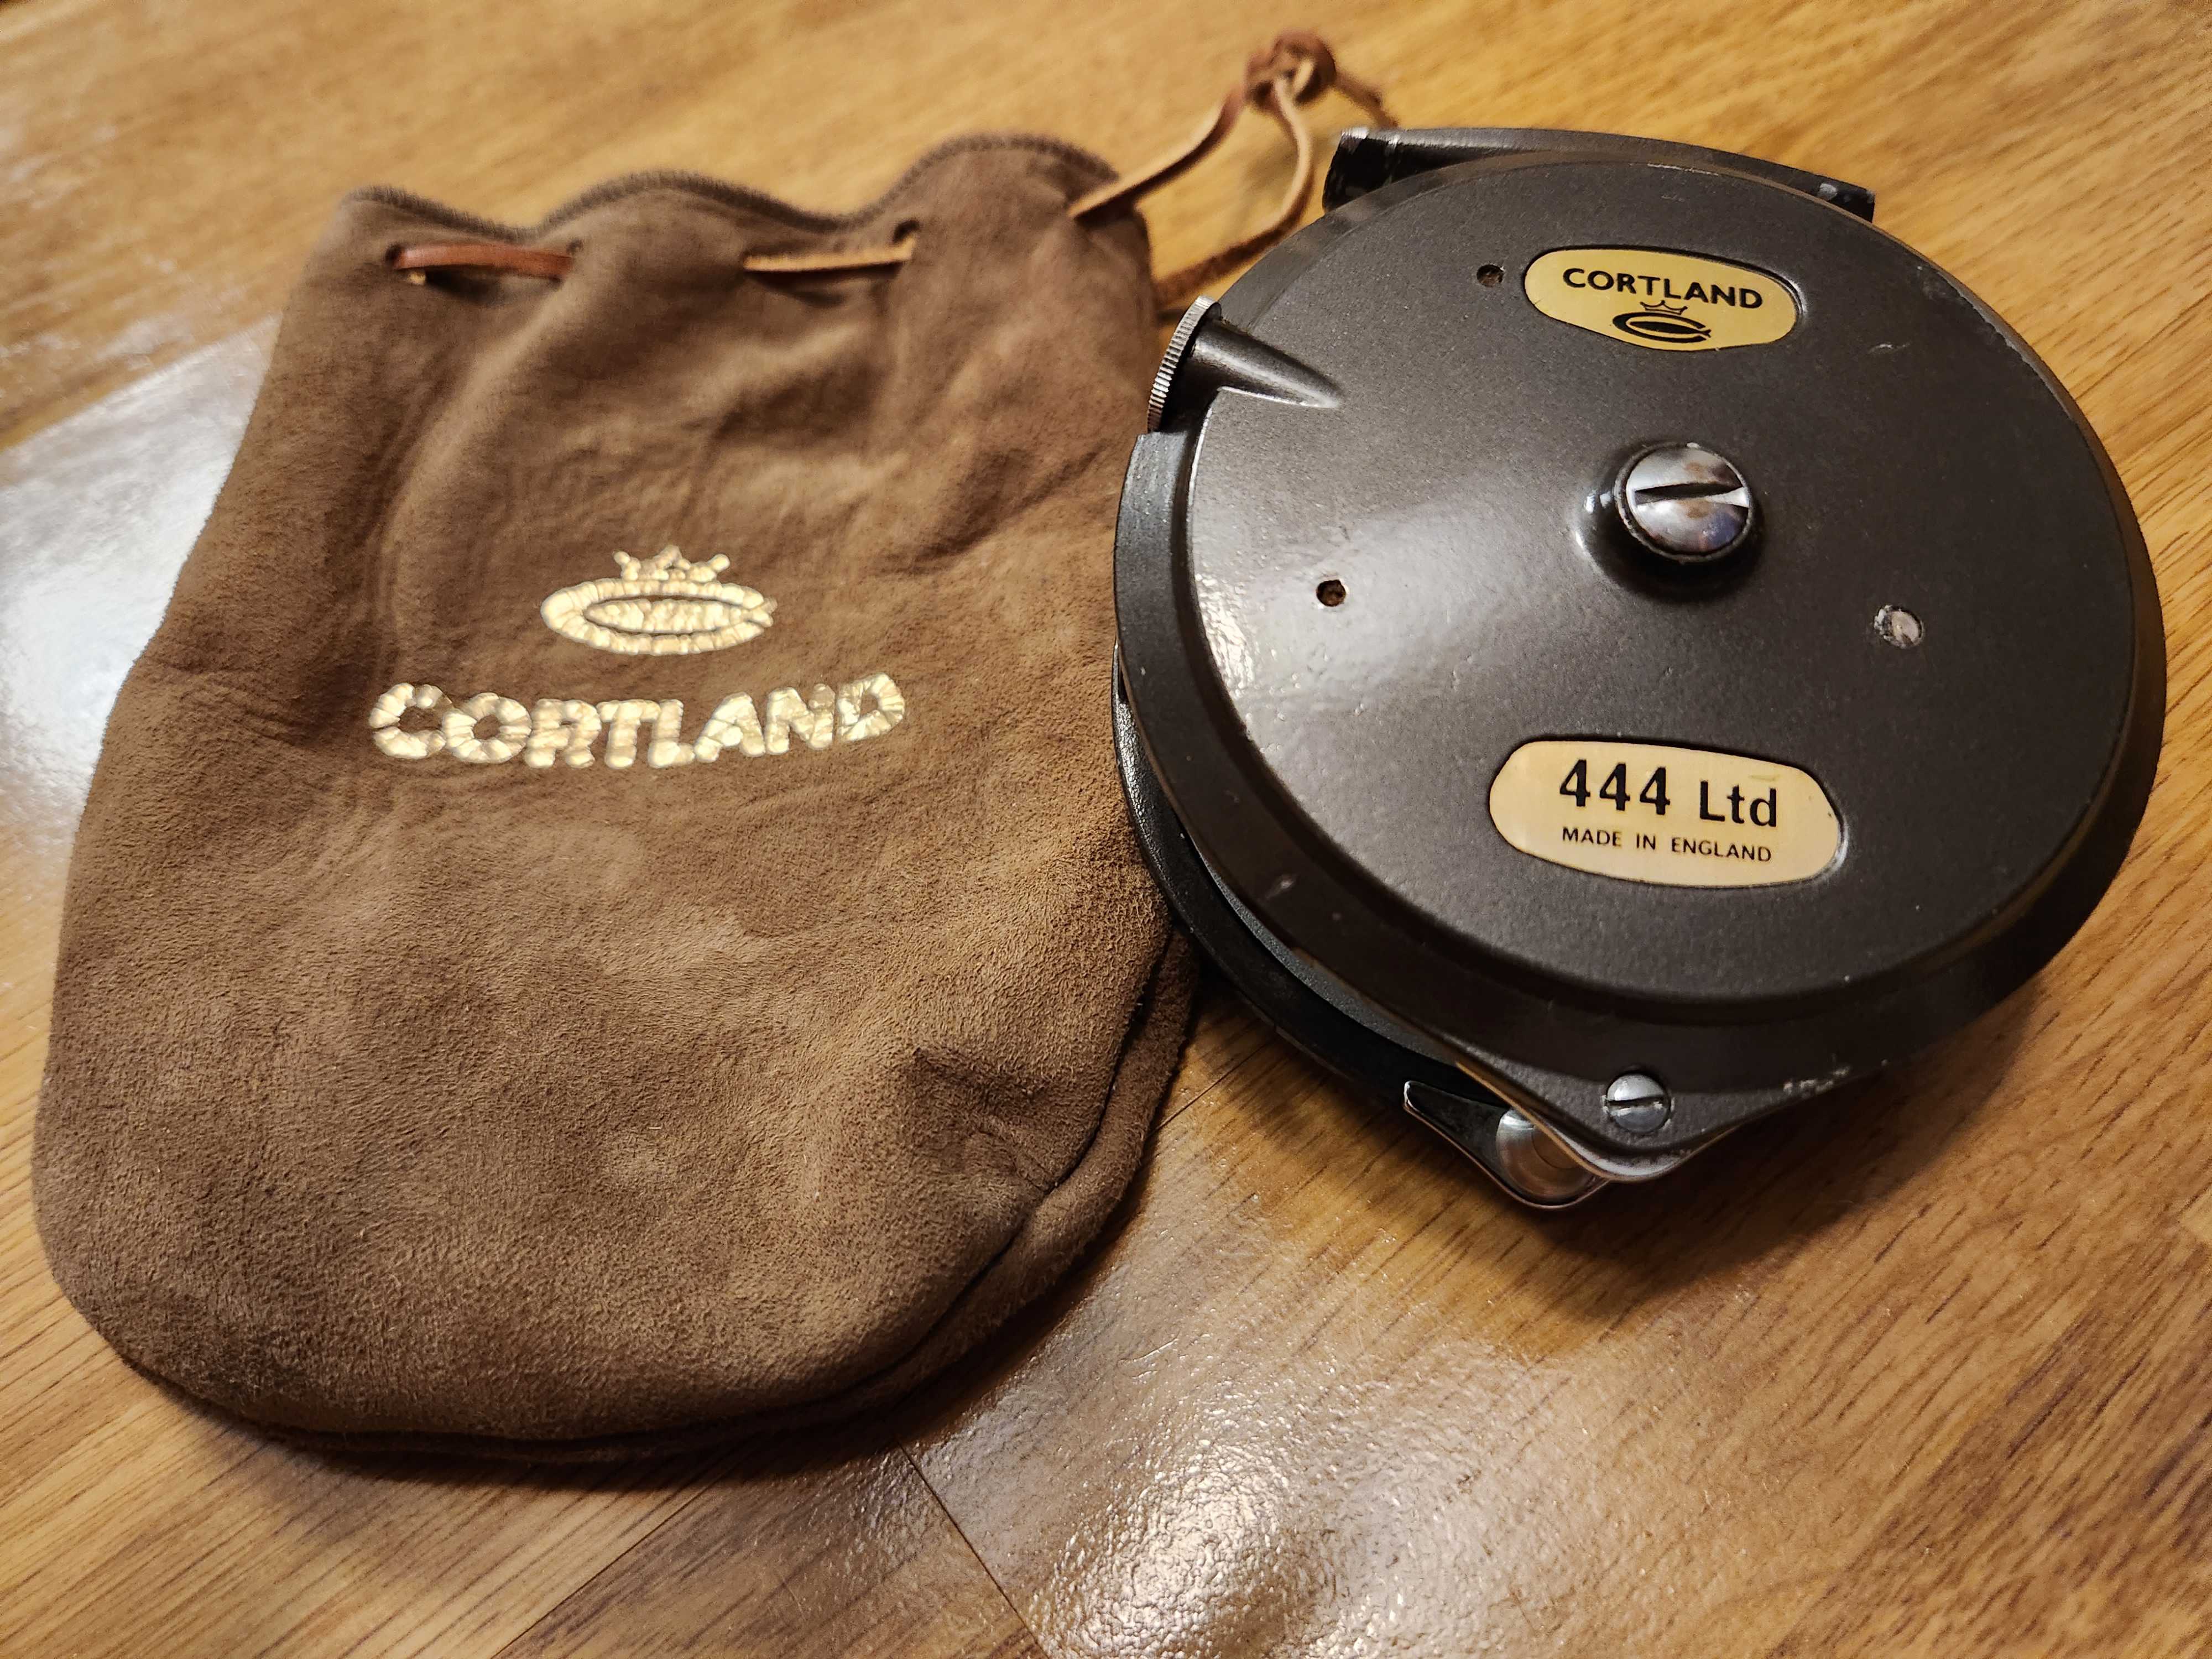 Cleaning a Cortland 444 Ltd., Classic Fly Reels